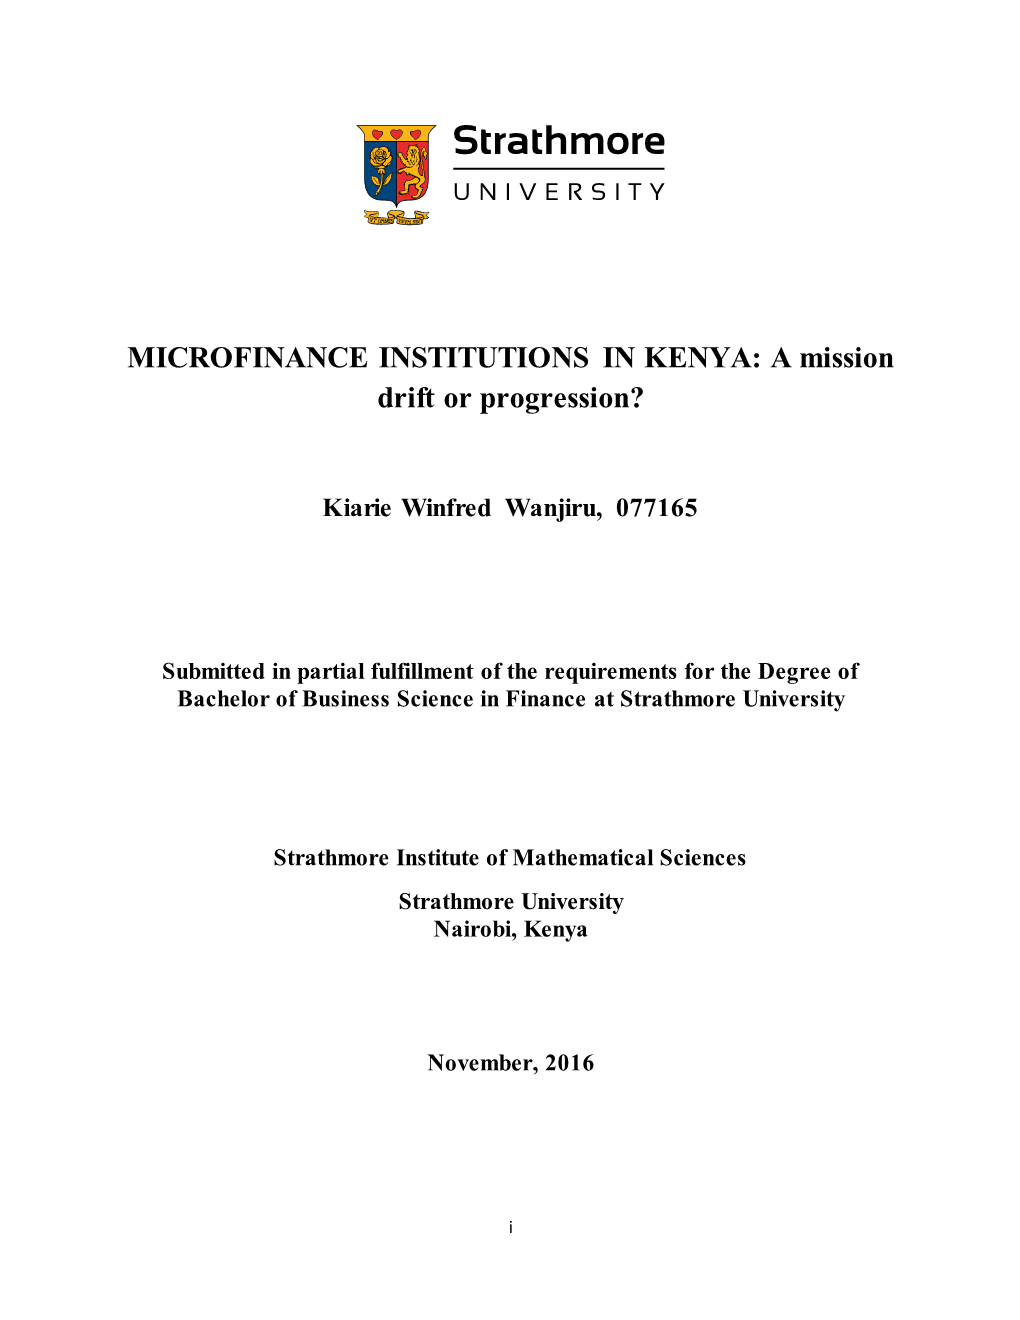 MICROFINANCE INSTITUTIONS in KENYA: a Mission Drift Or Progression?